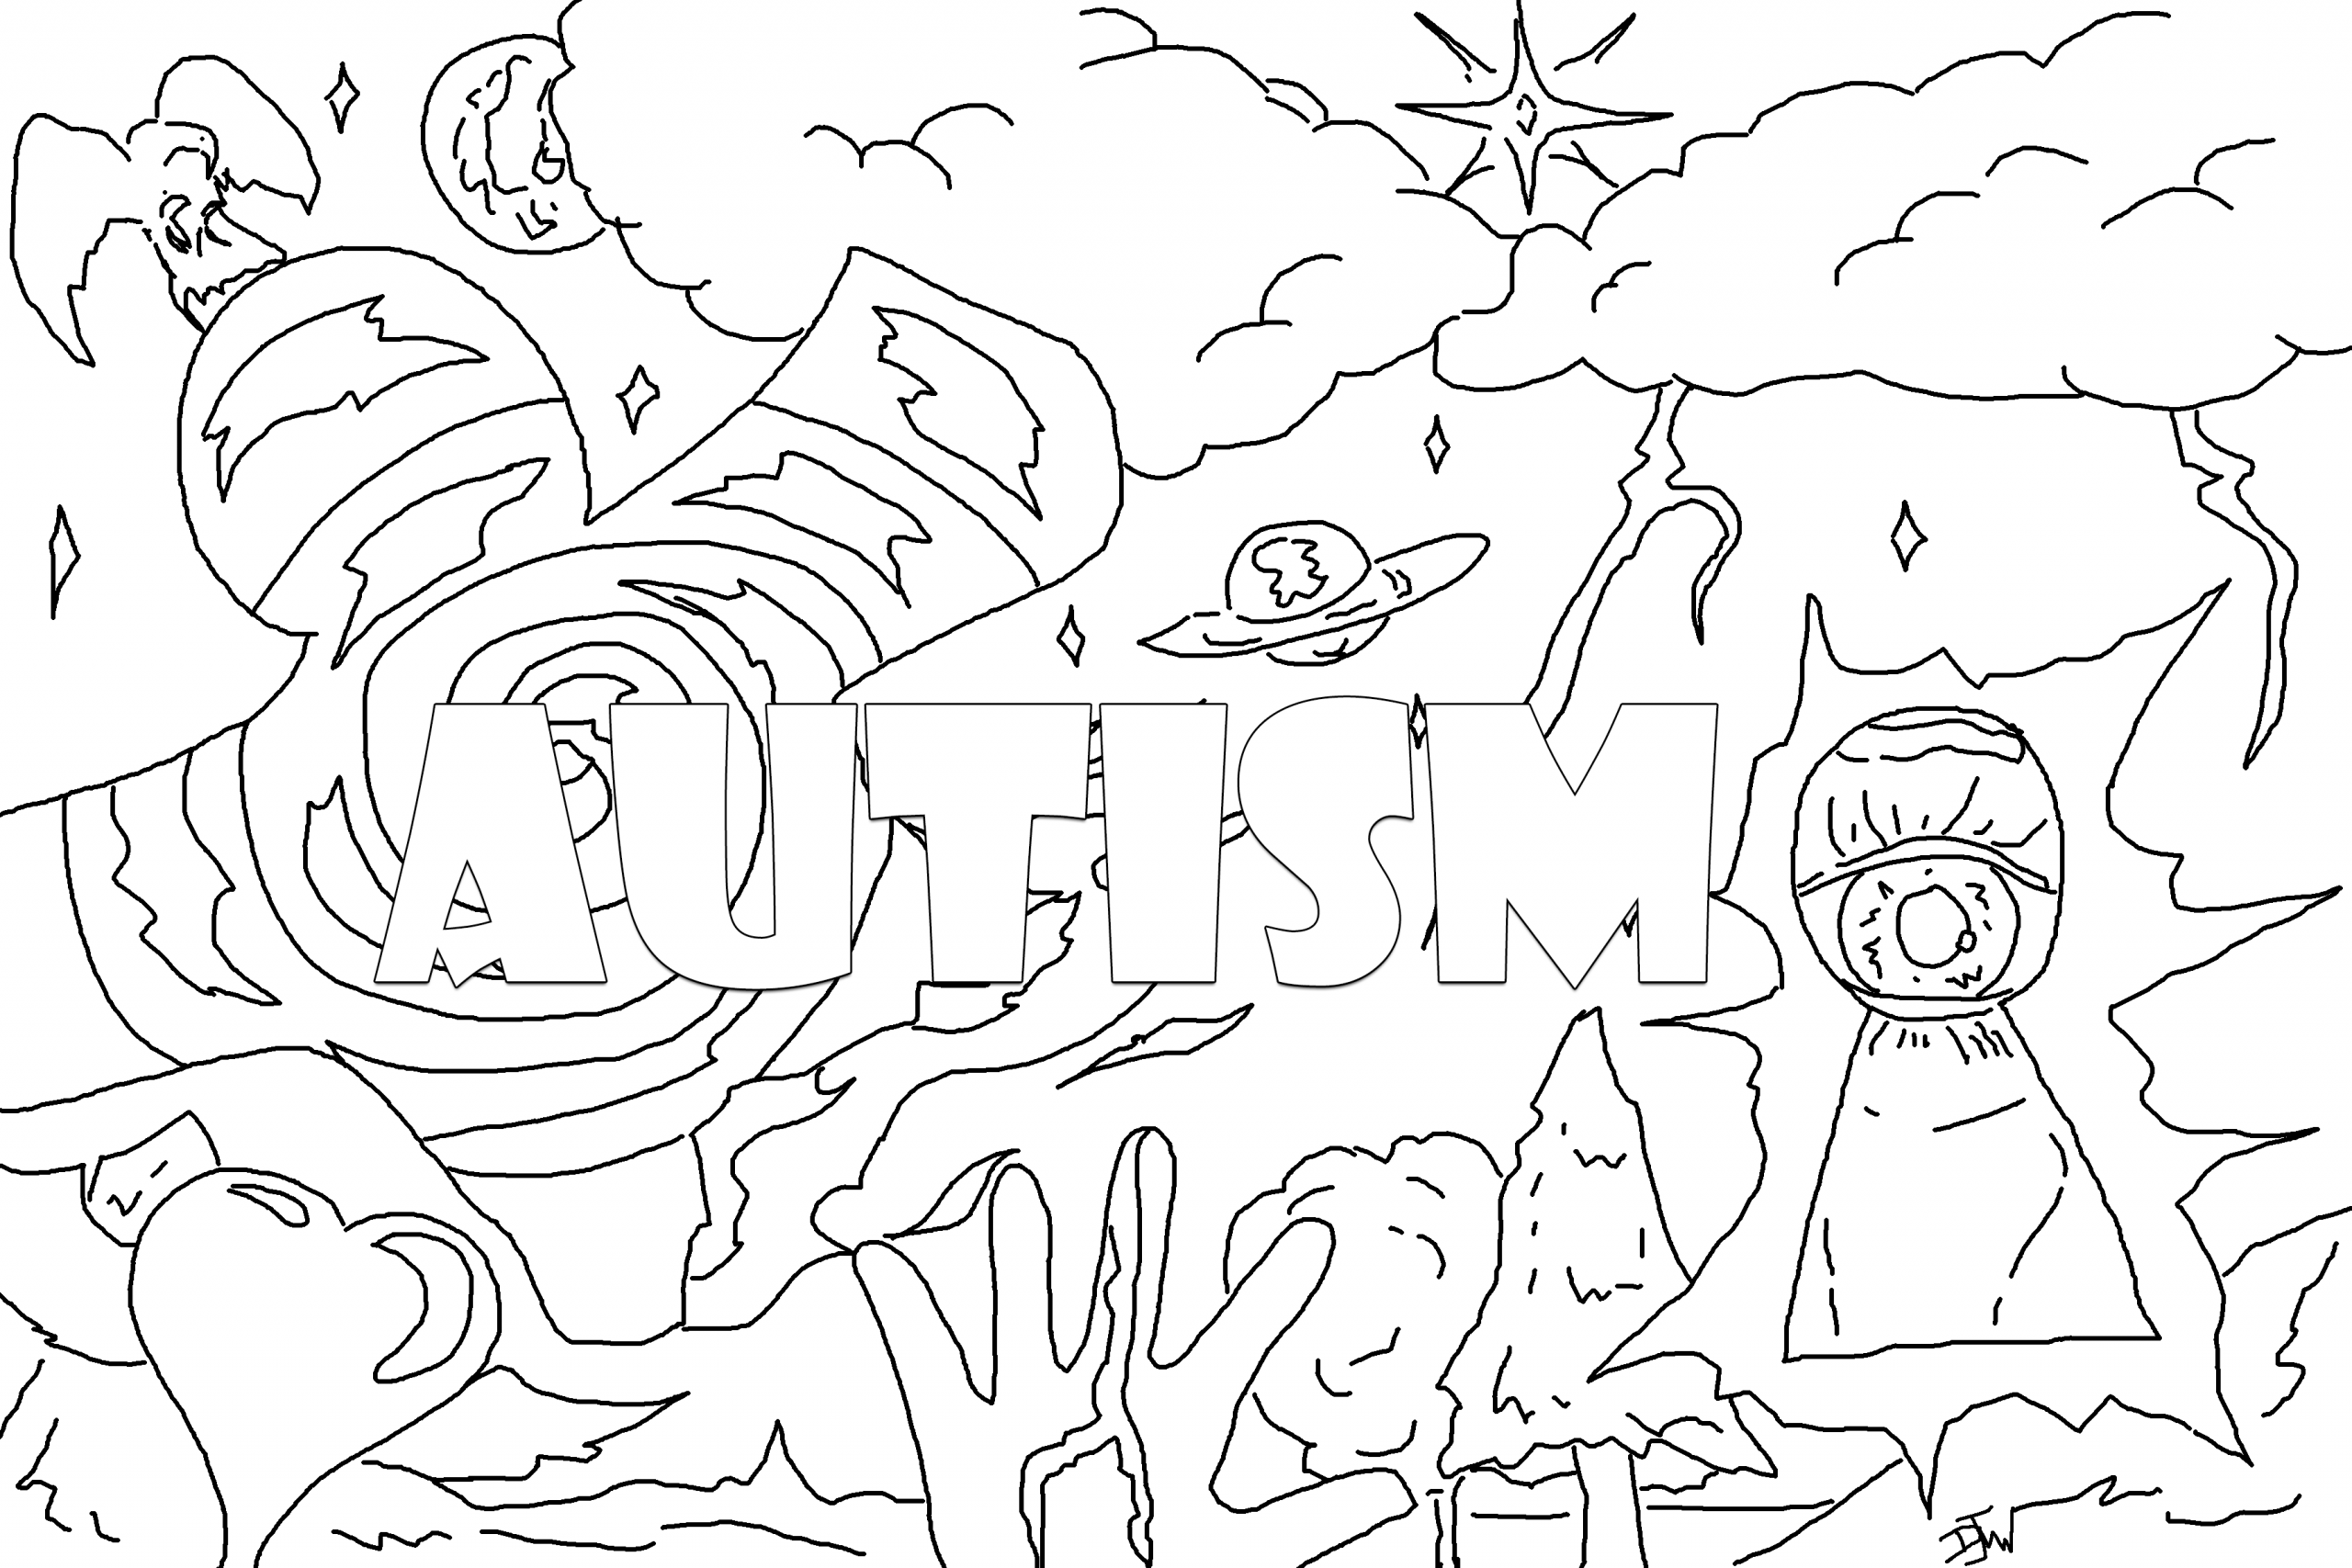 Coloring Pages : Awesome Free Coloring Printables Pages Remarkable ...